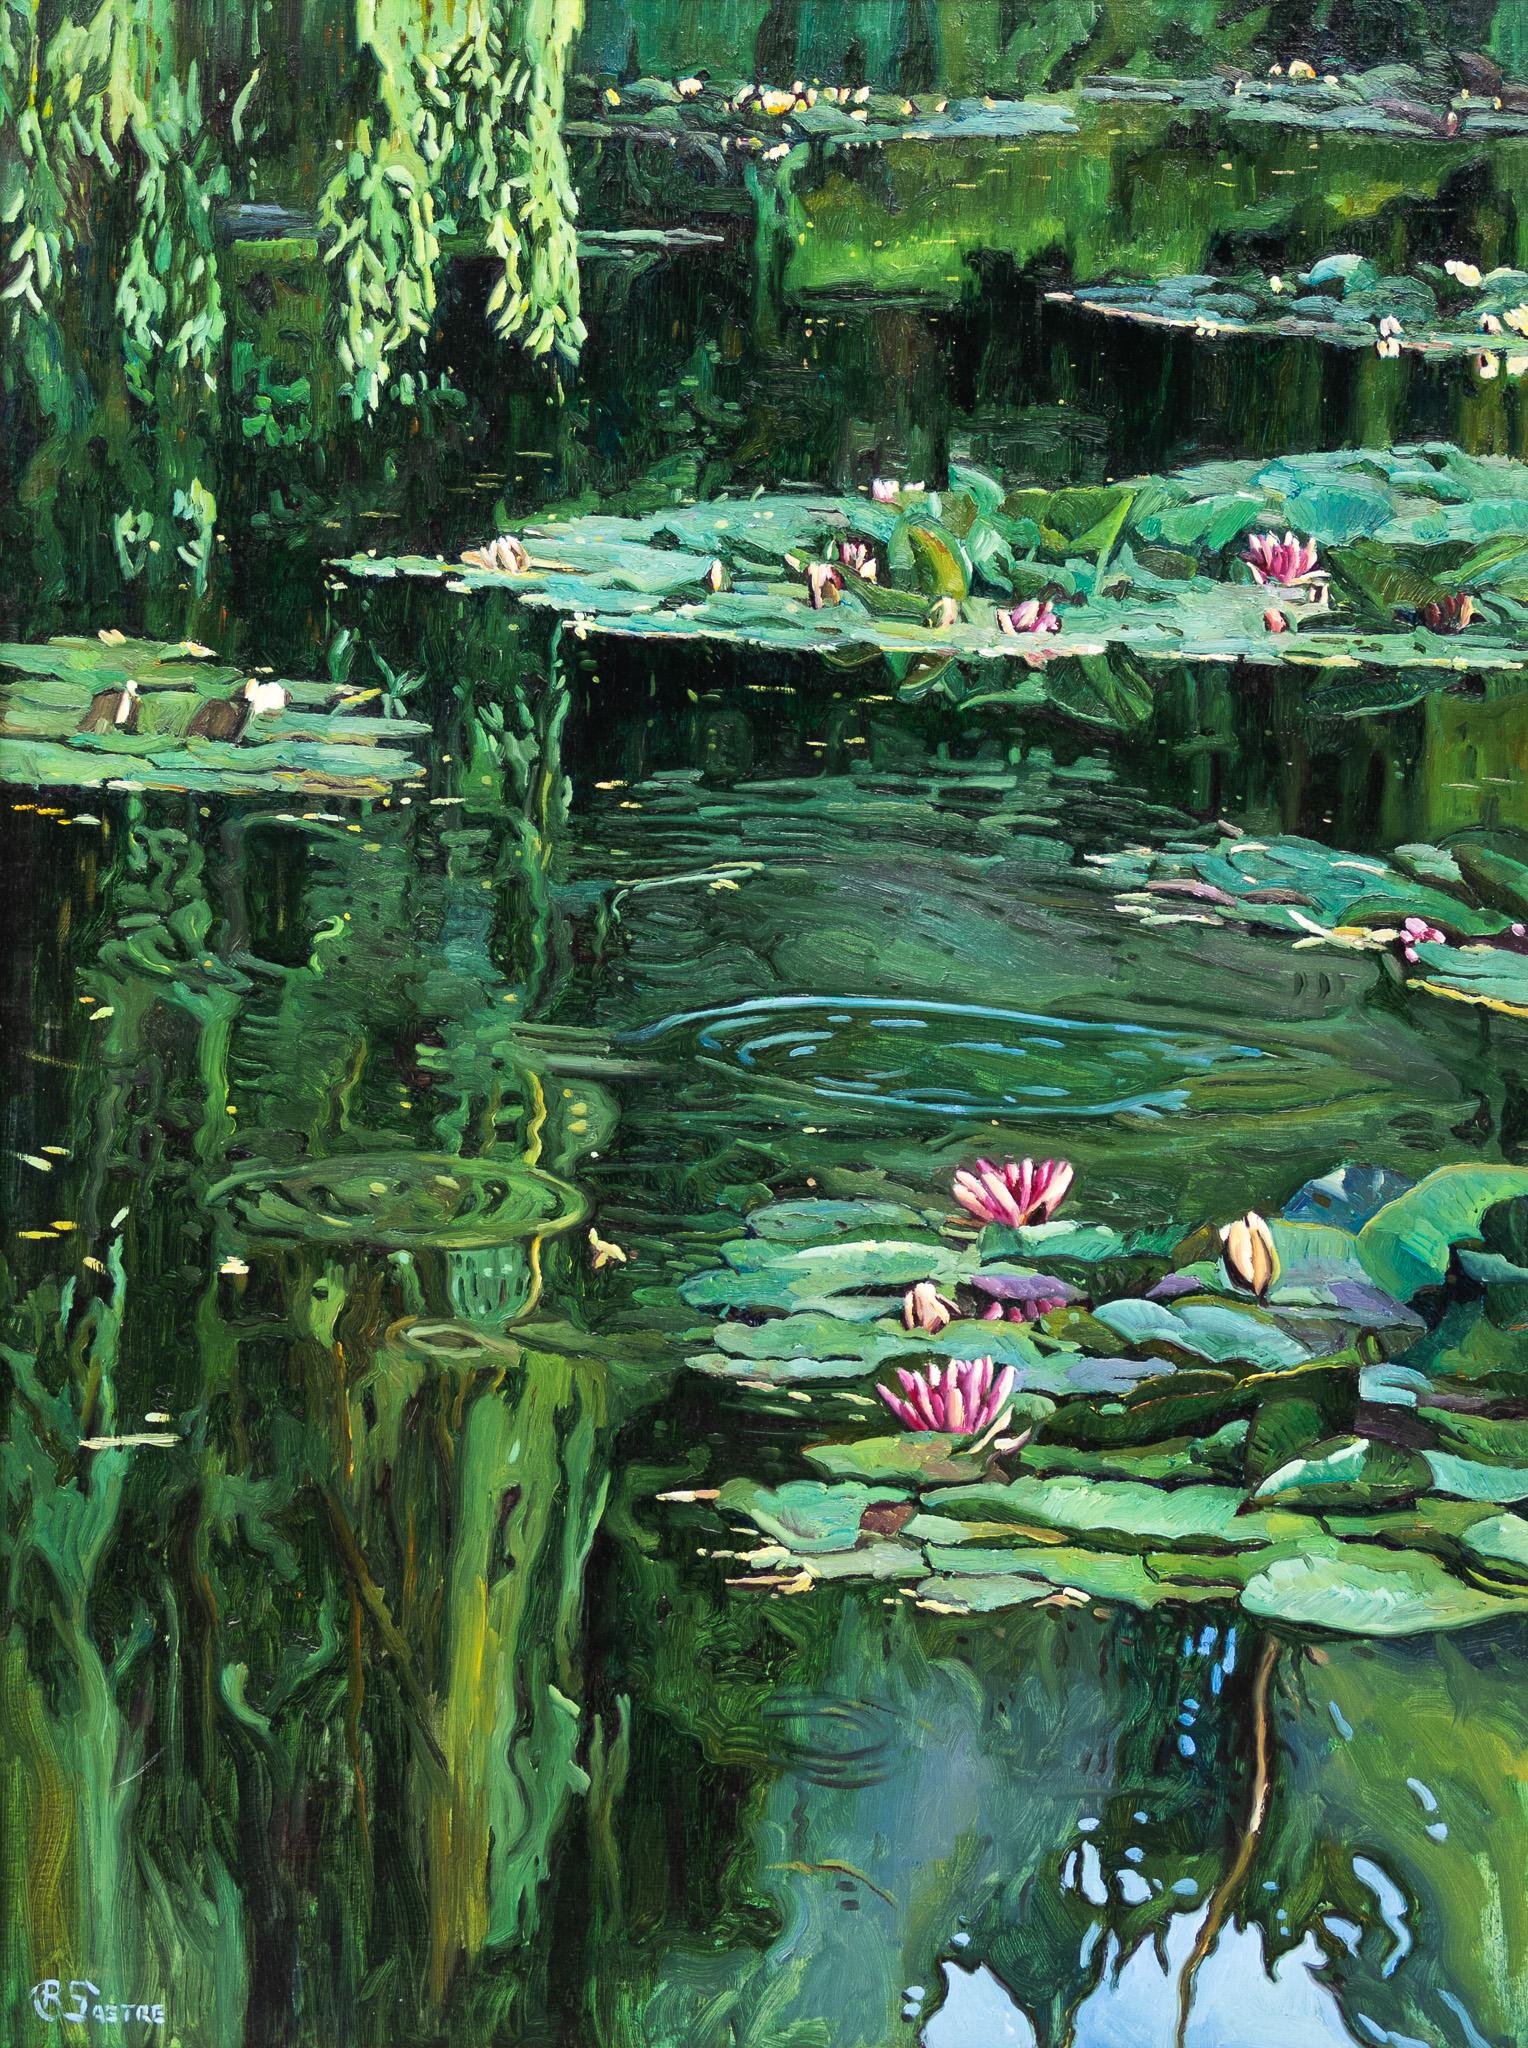 Bartolome Sastre Landscape Painting - "Water Lilies Over Green"